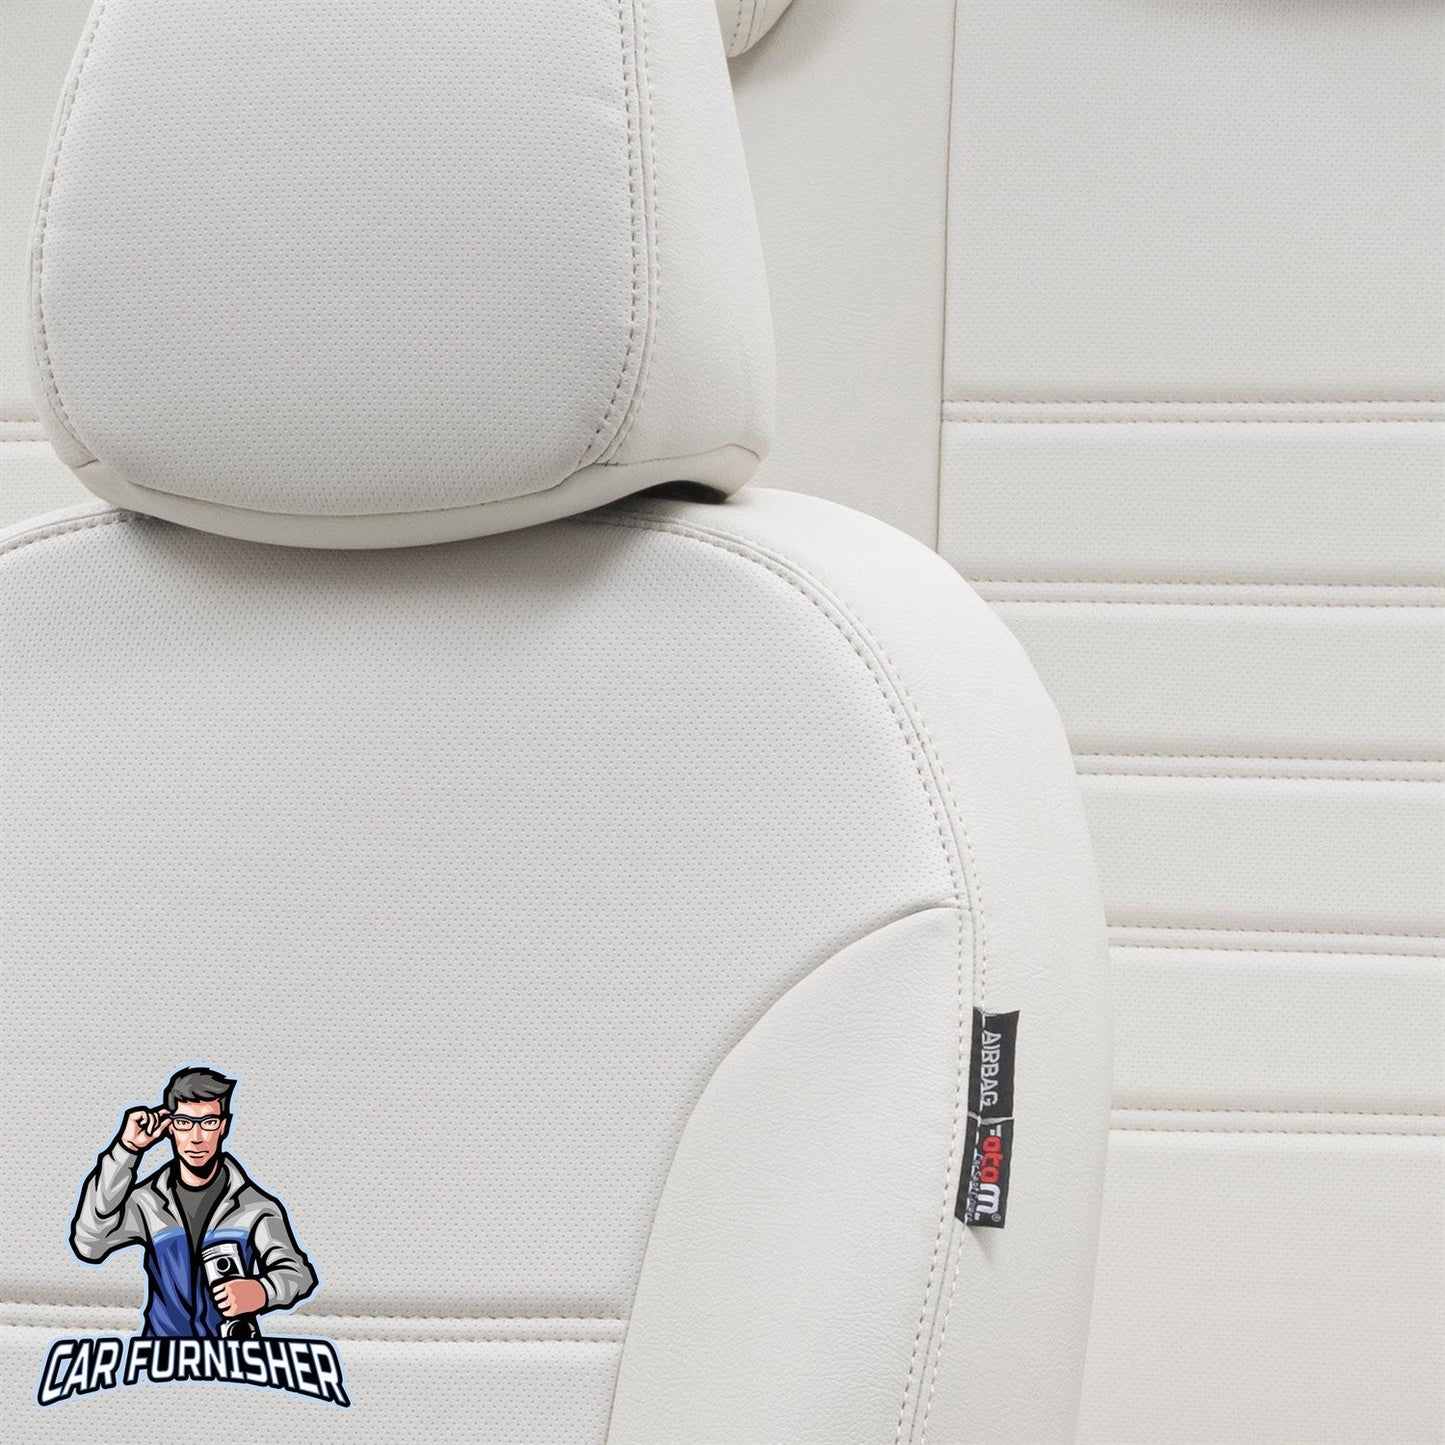 Mercedes ML Seat Covers Istanbul Leather Design Ivory Leather